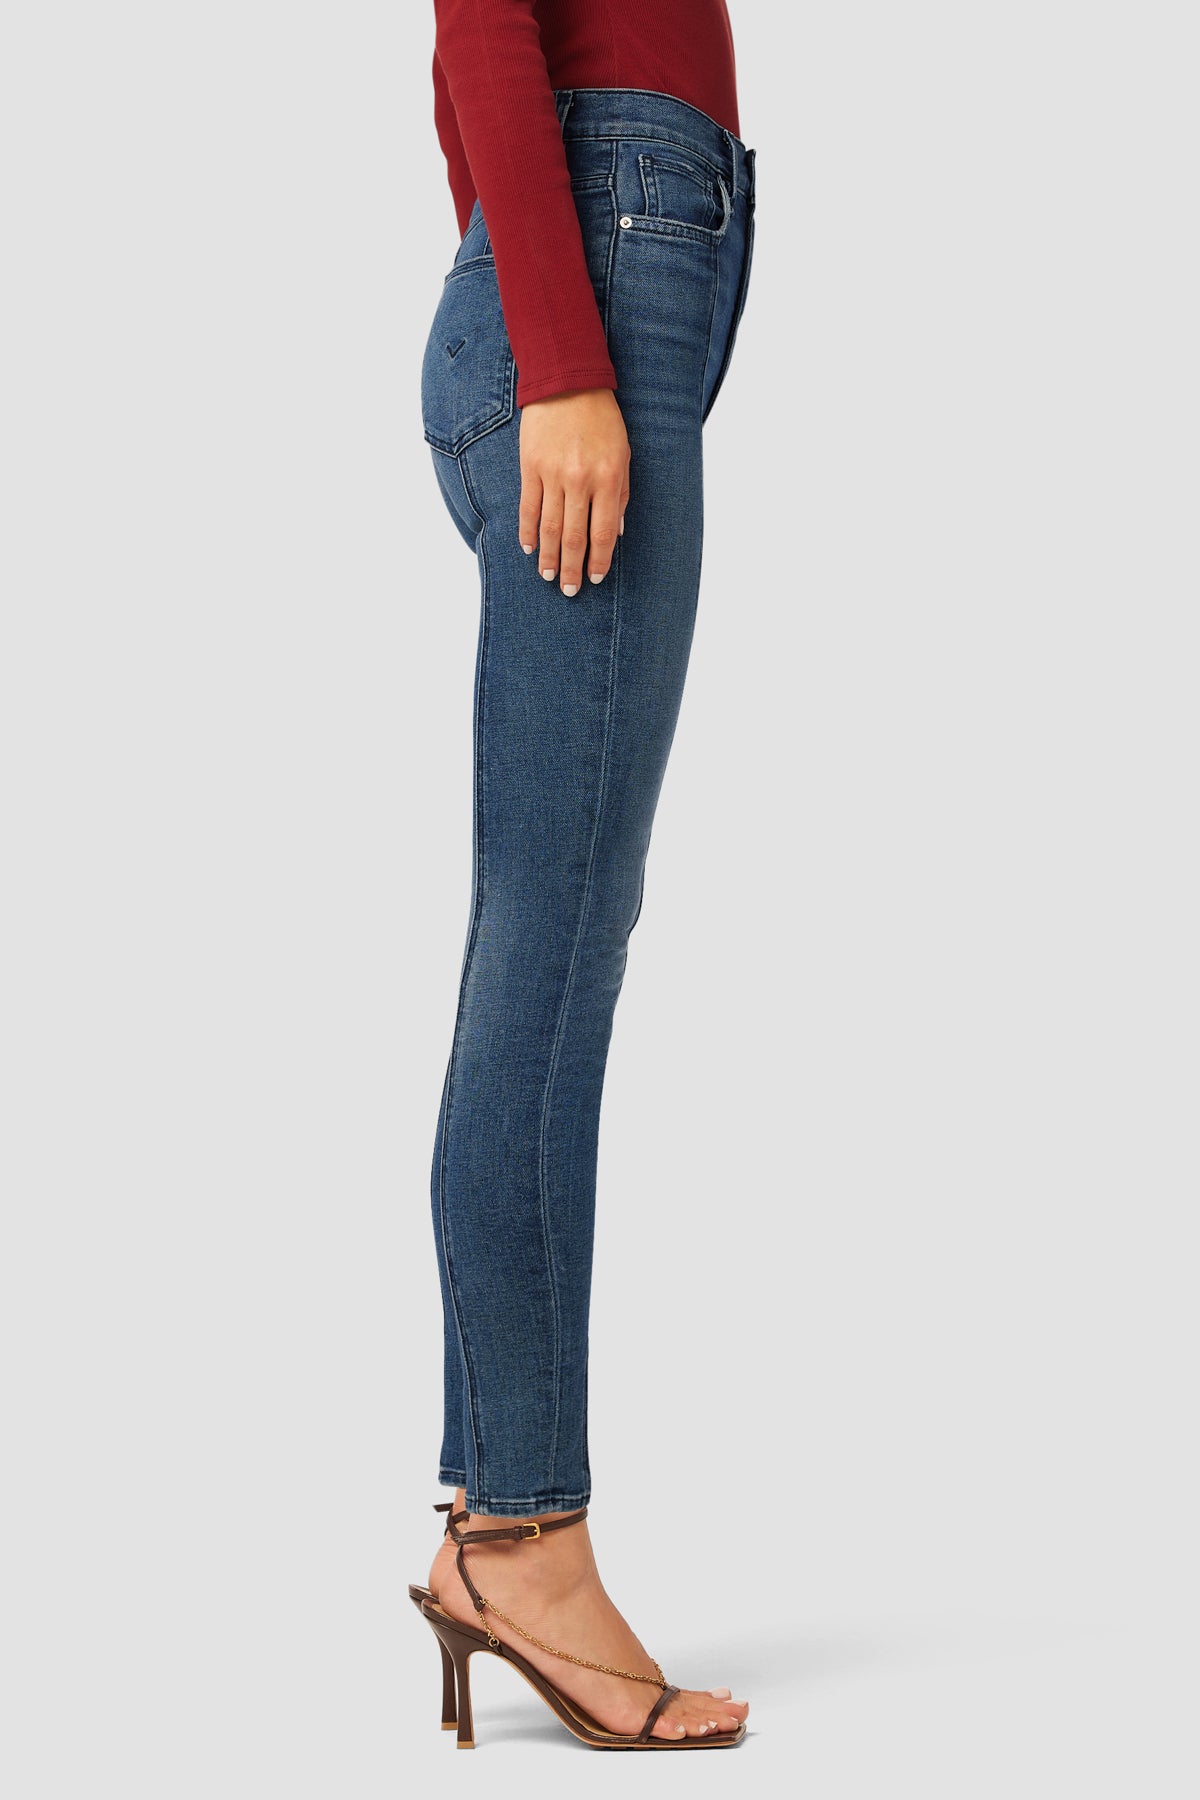 Women's High-Rise Skinny Ankle Jeans